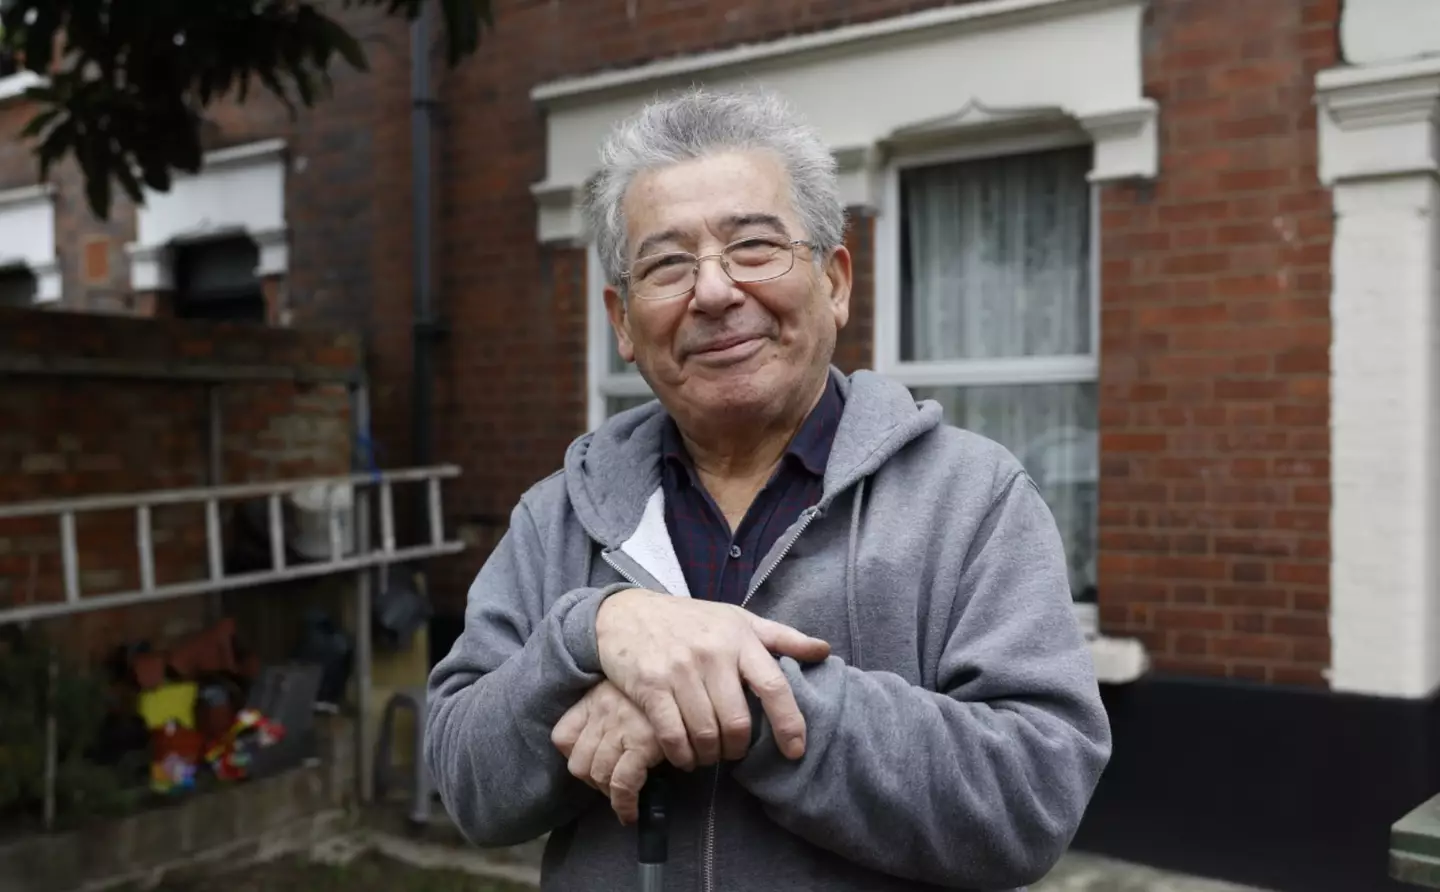 Hasan Rezvan has lived in his home since 1970.